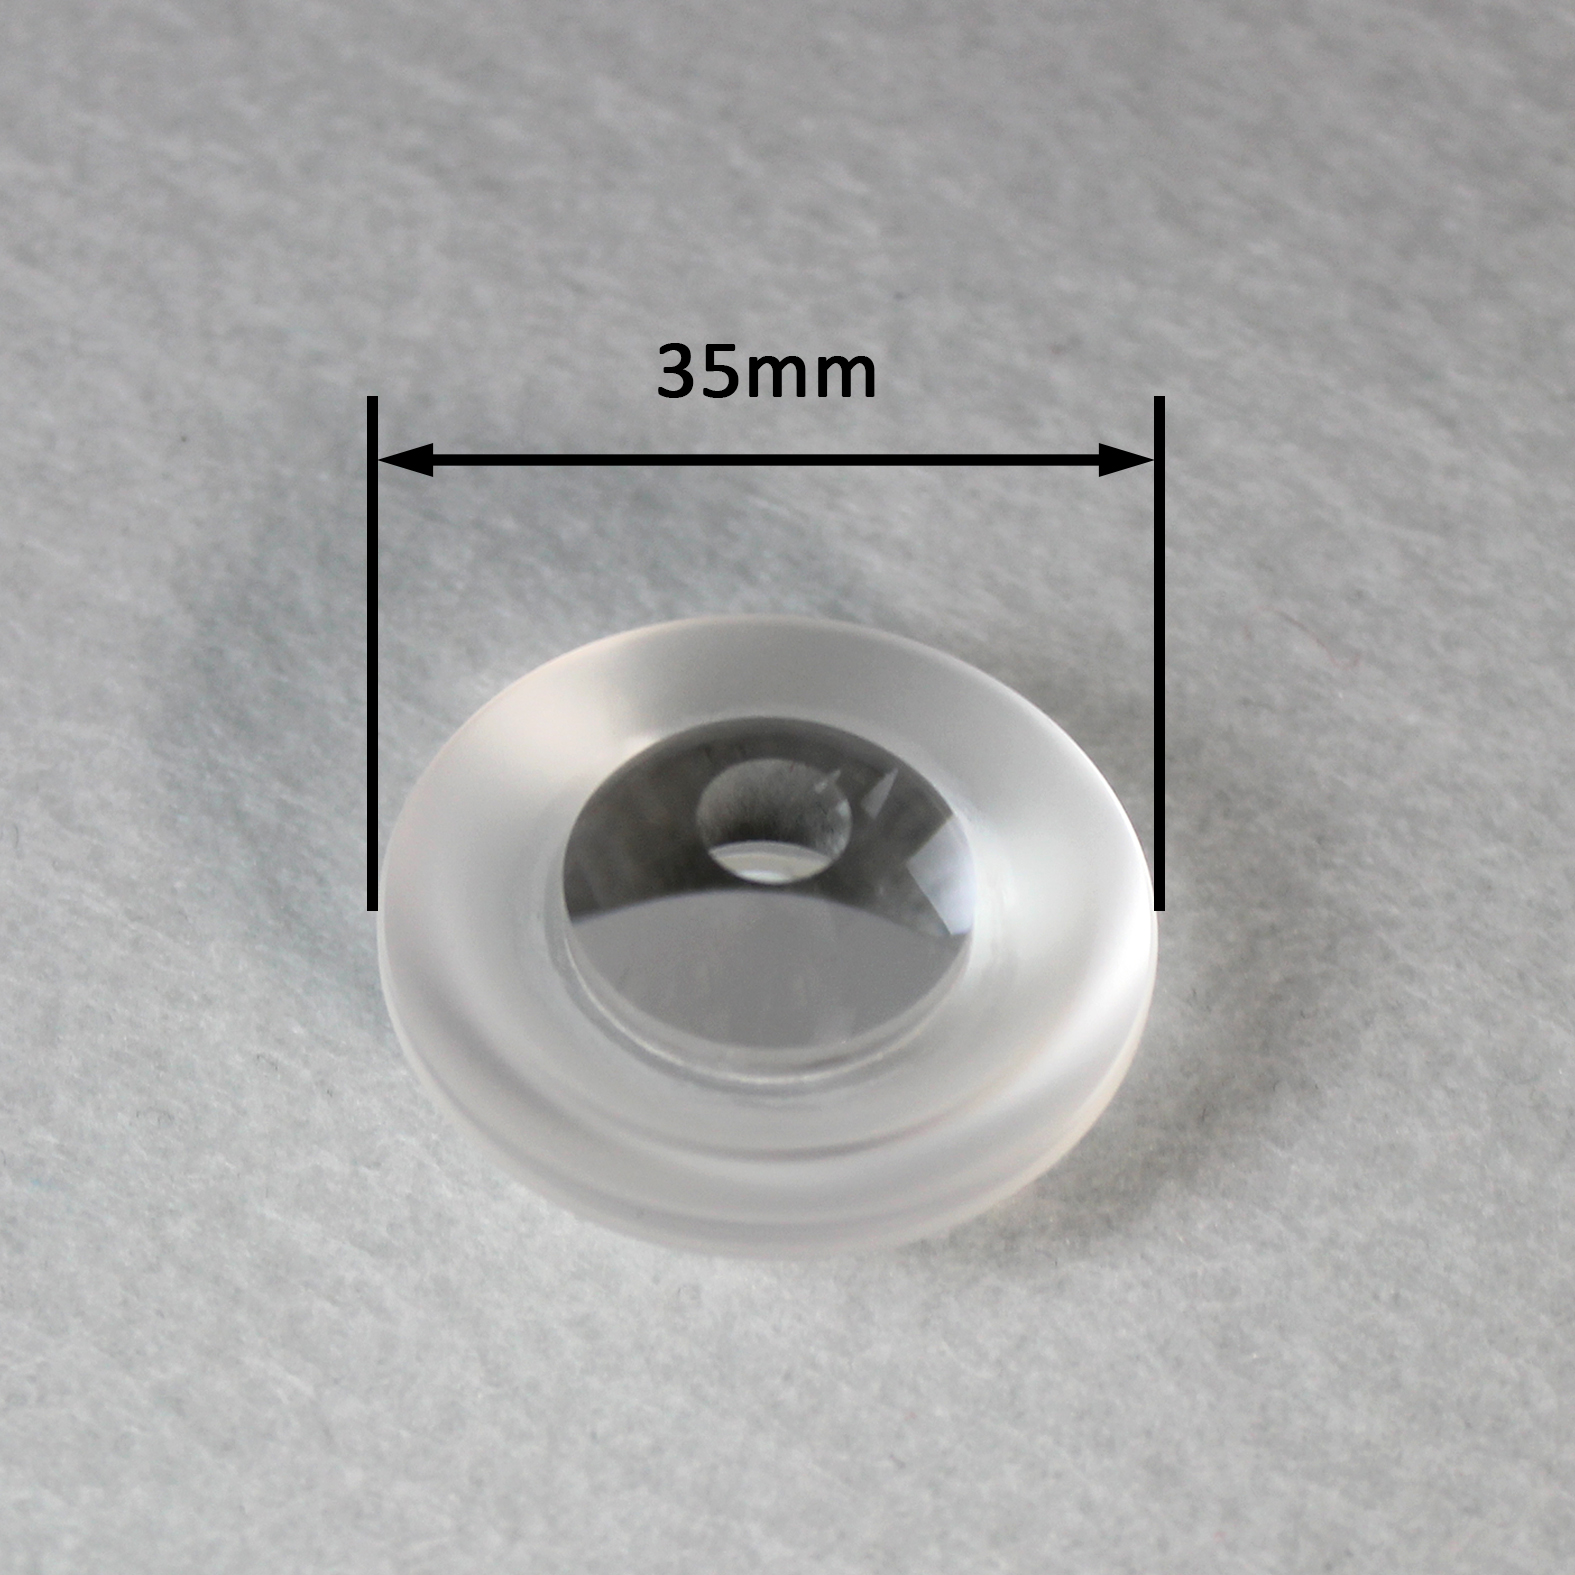 Customized Coated Optical Cemented Achromatic Double Lenses